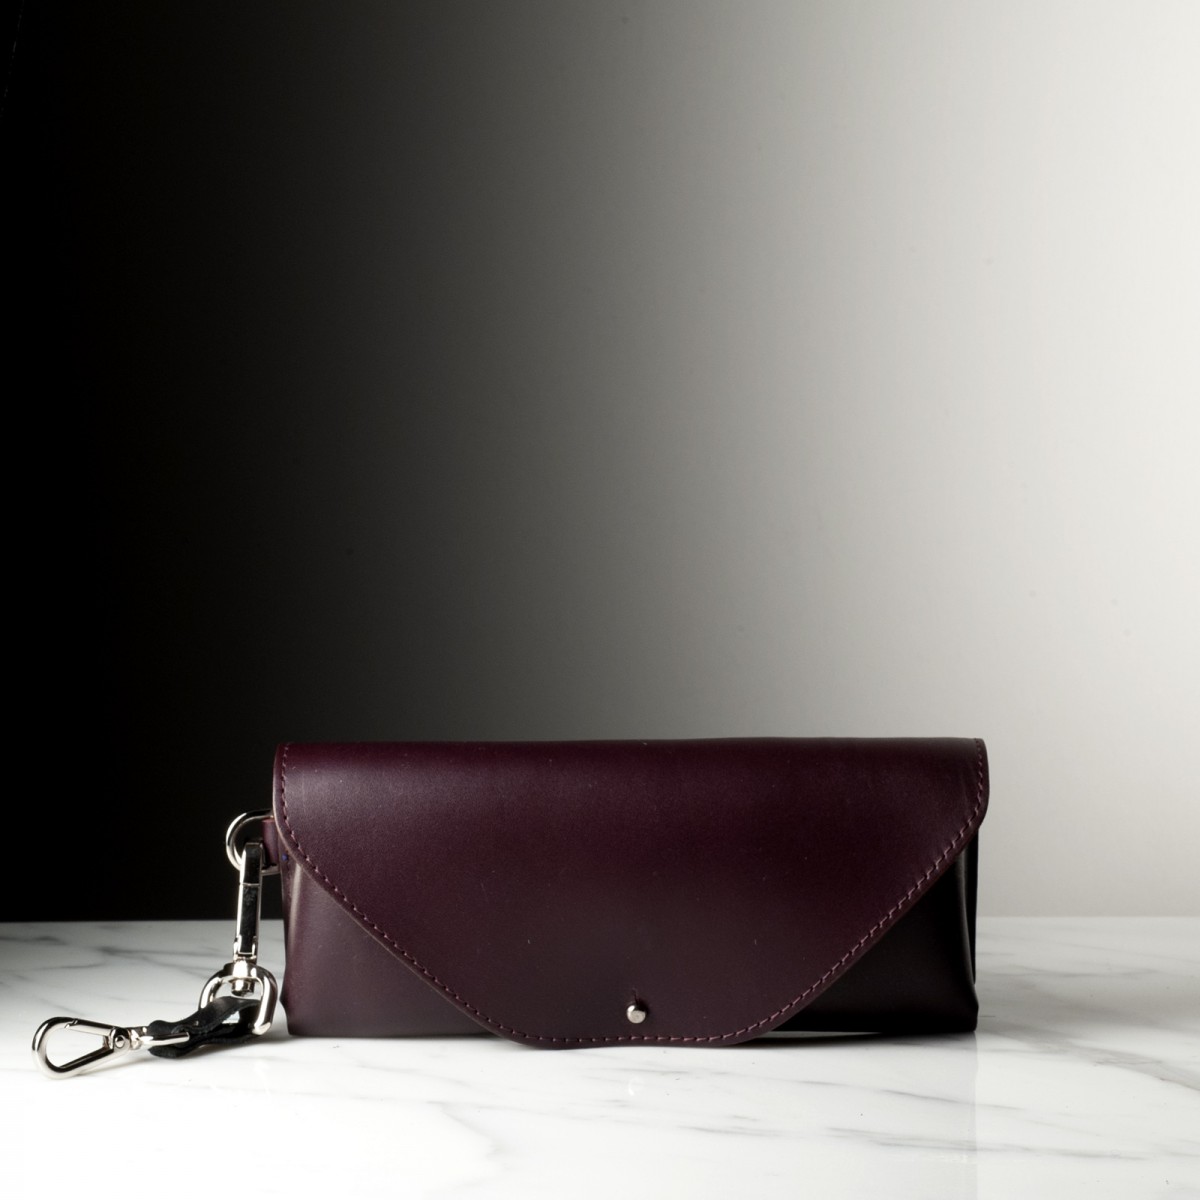 MILENA - Handcrafted leather case made in Italy